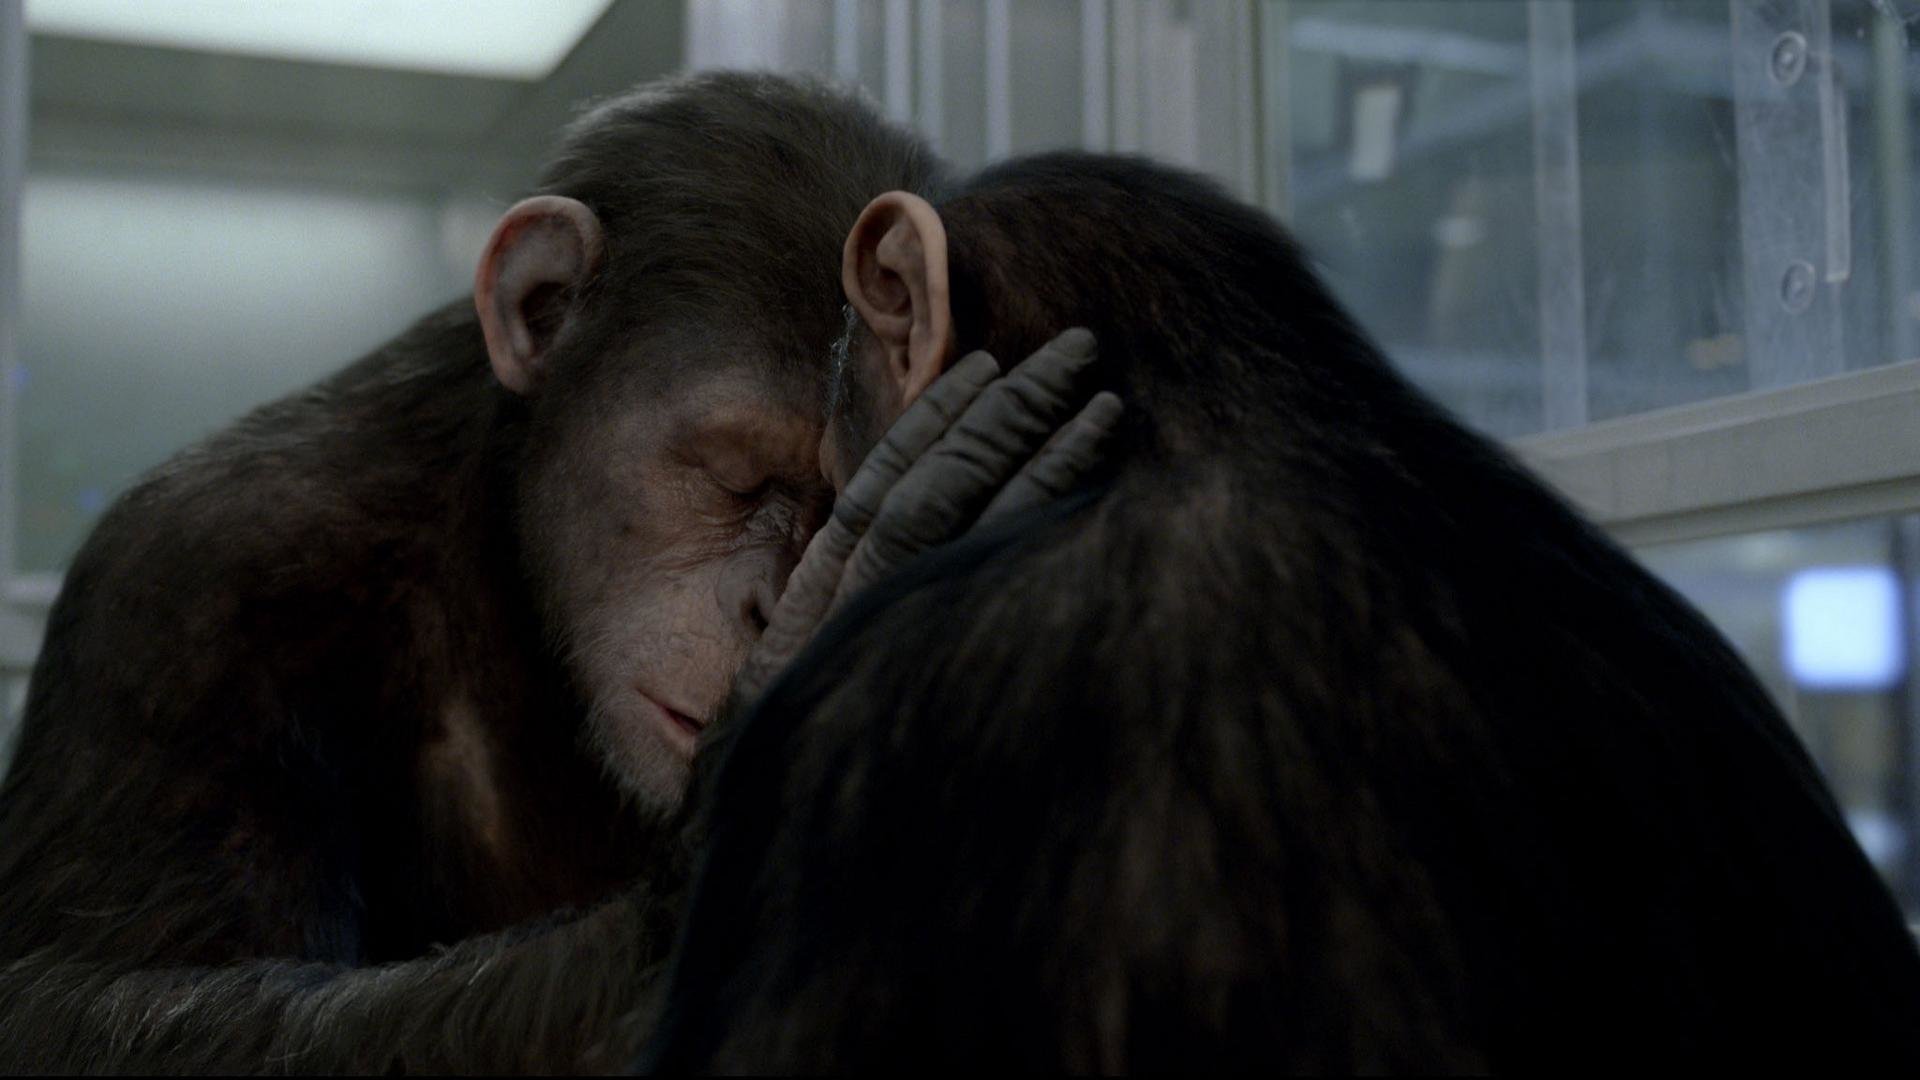 Awesome Rise Of The Planet Of The Apes free wallpaper ID:271553 for full hd 1920x1080 desktop